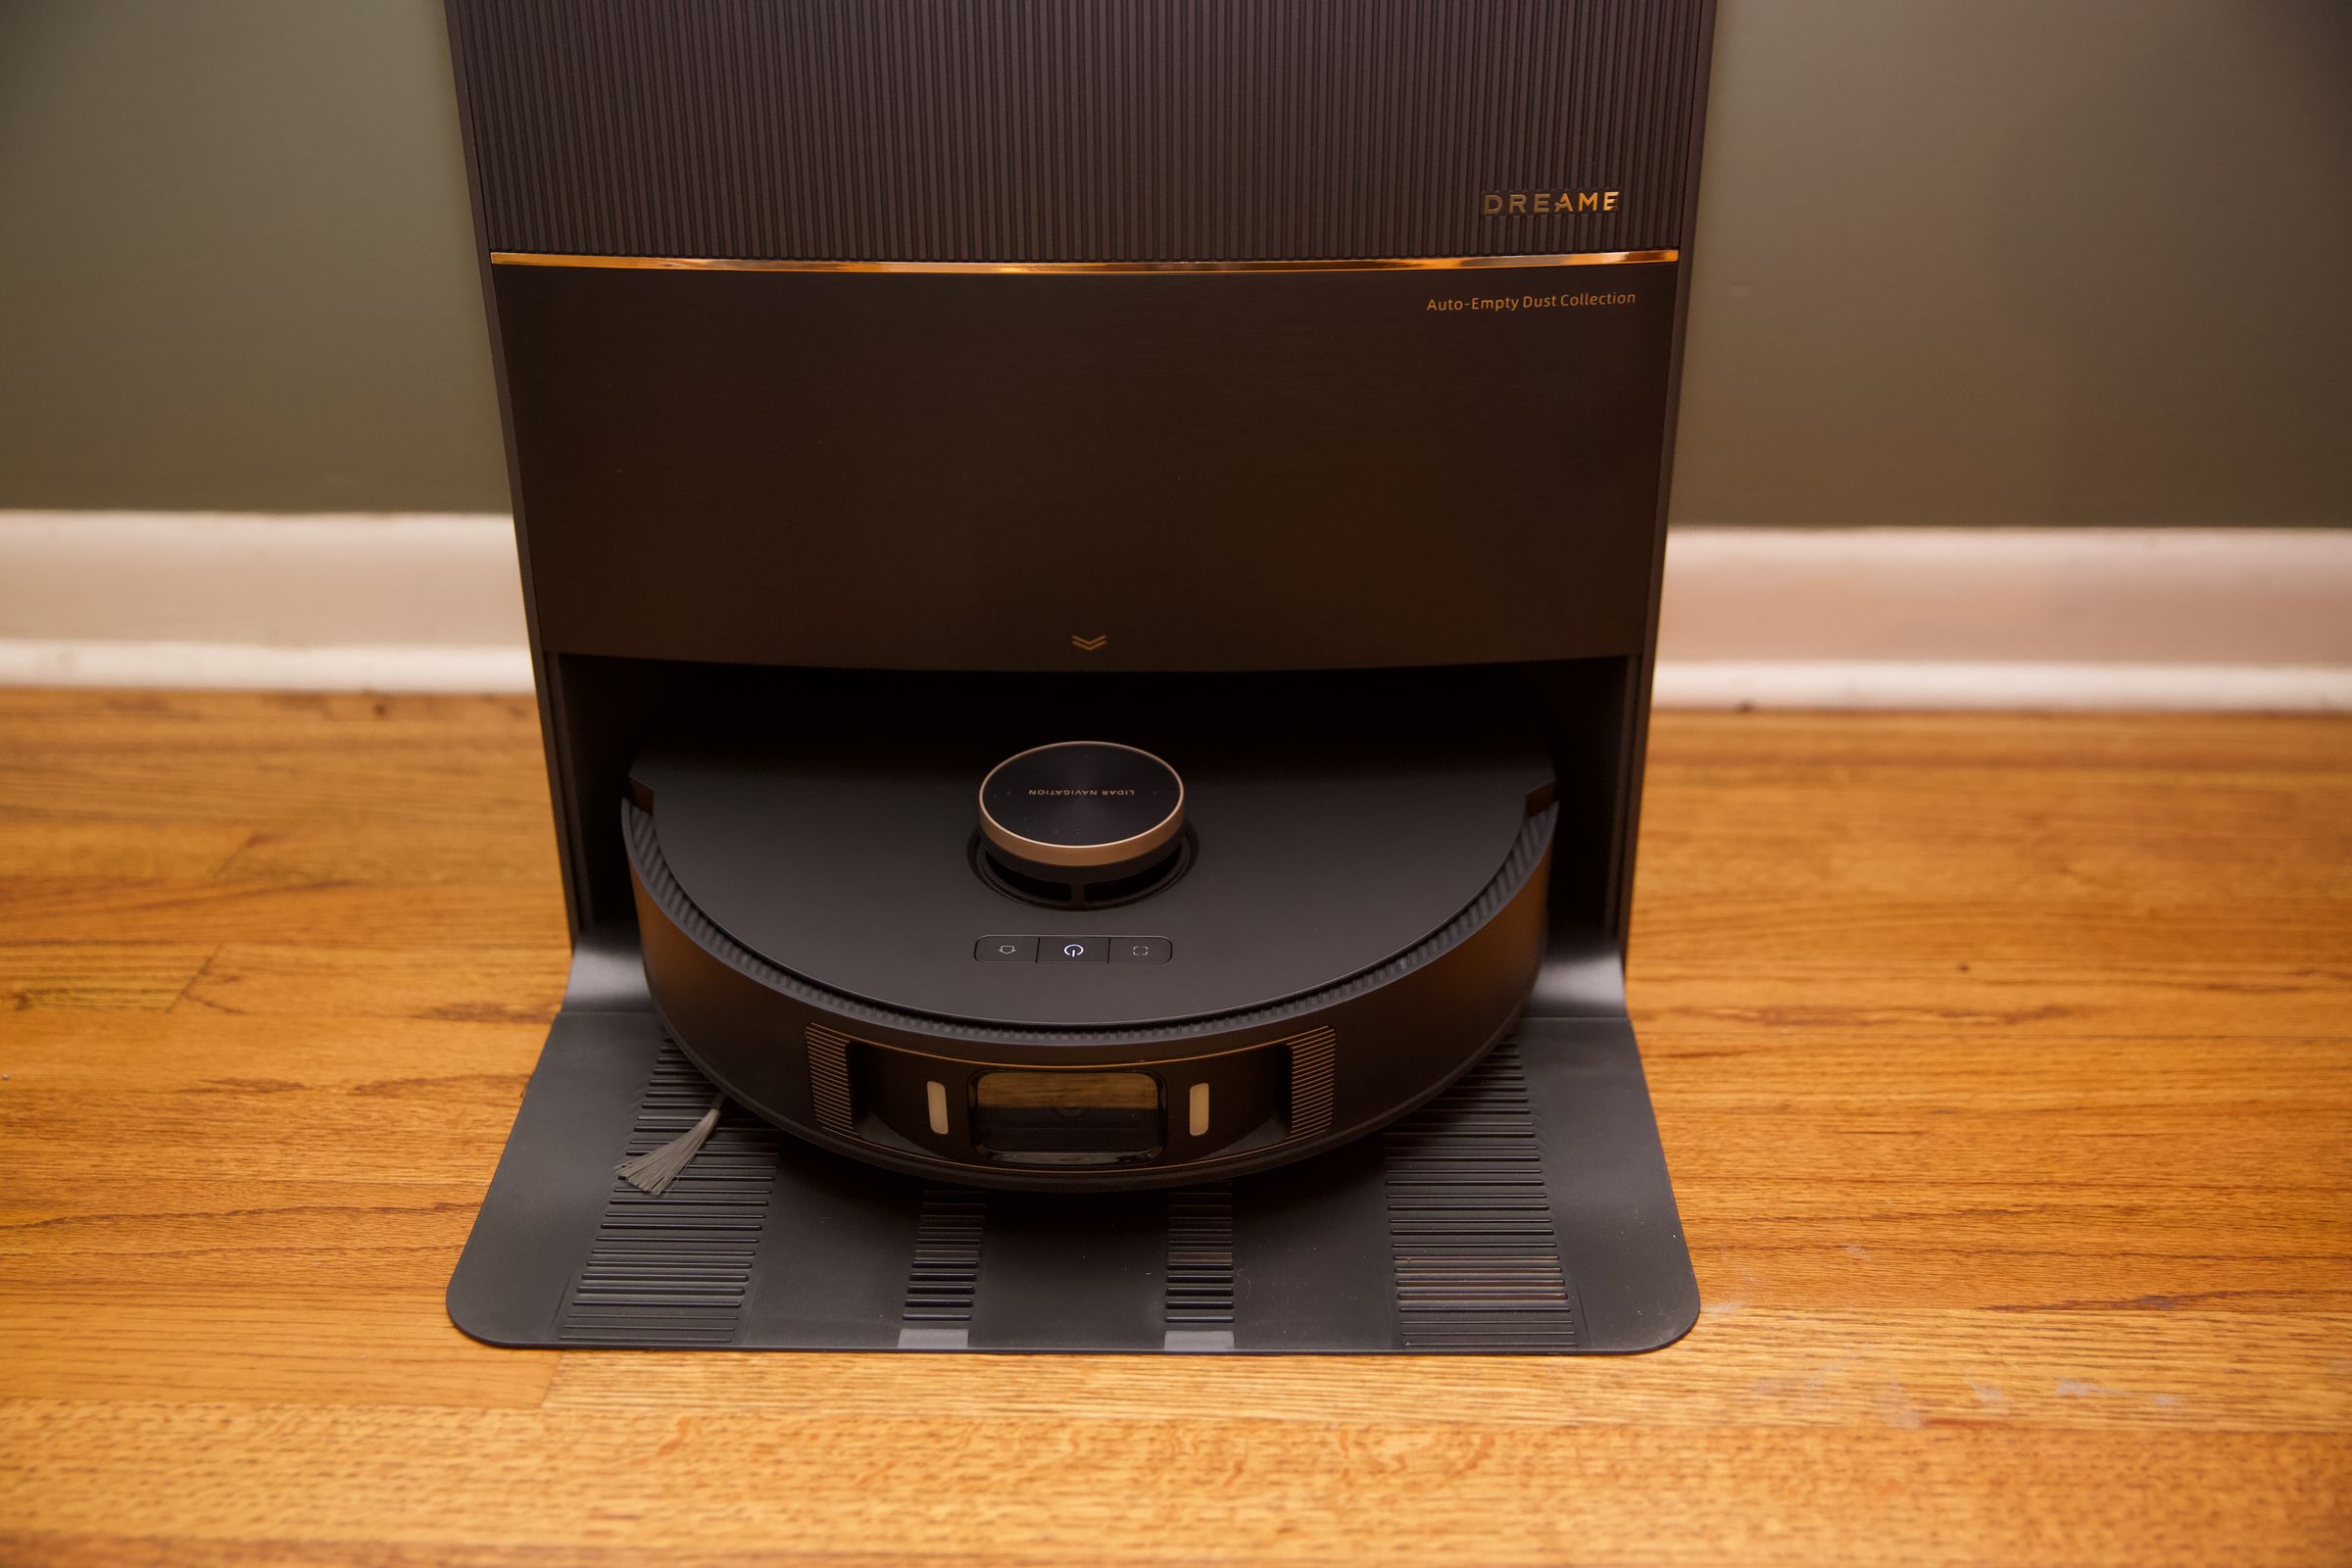 The DreameBot L20 Ultra robot vacuum and mop sitting docked in its auto-emptying station.